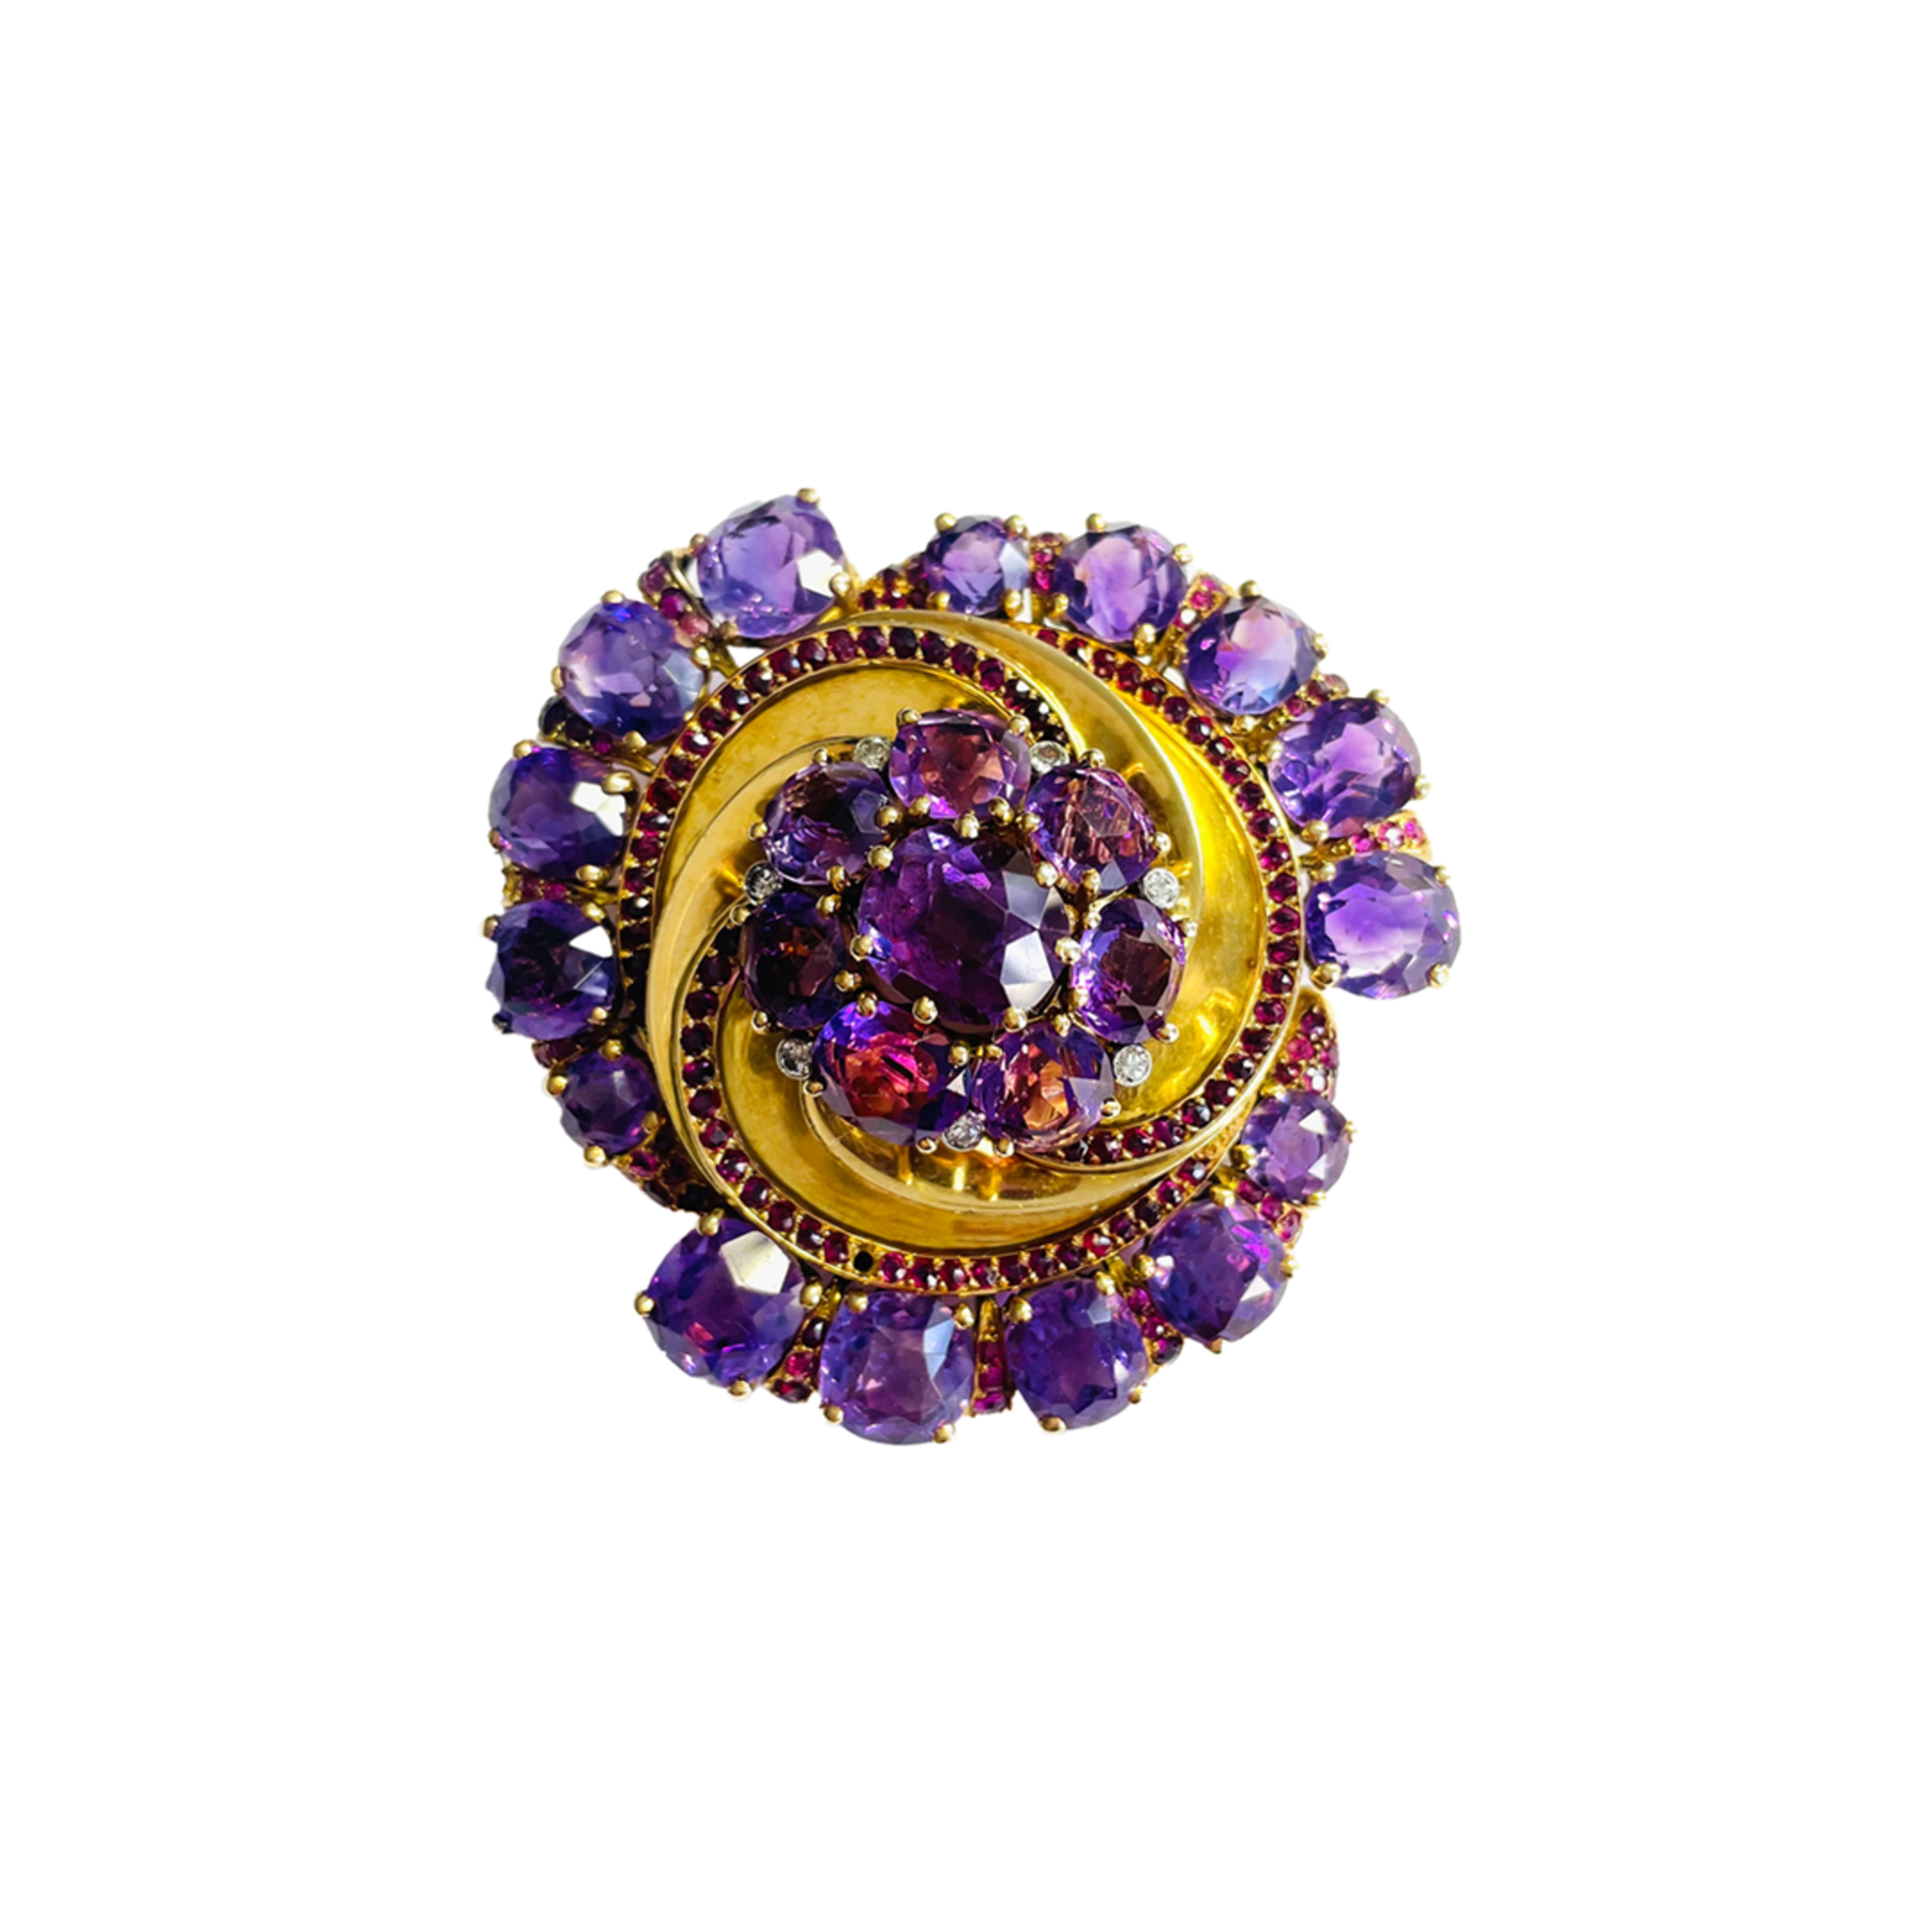 French 1940s 18KT Yellow Gold Amethyst, Diamond & Ruby Brooch front